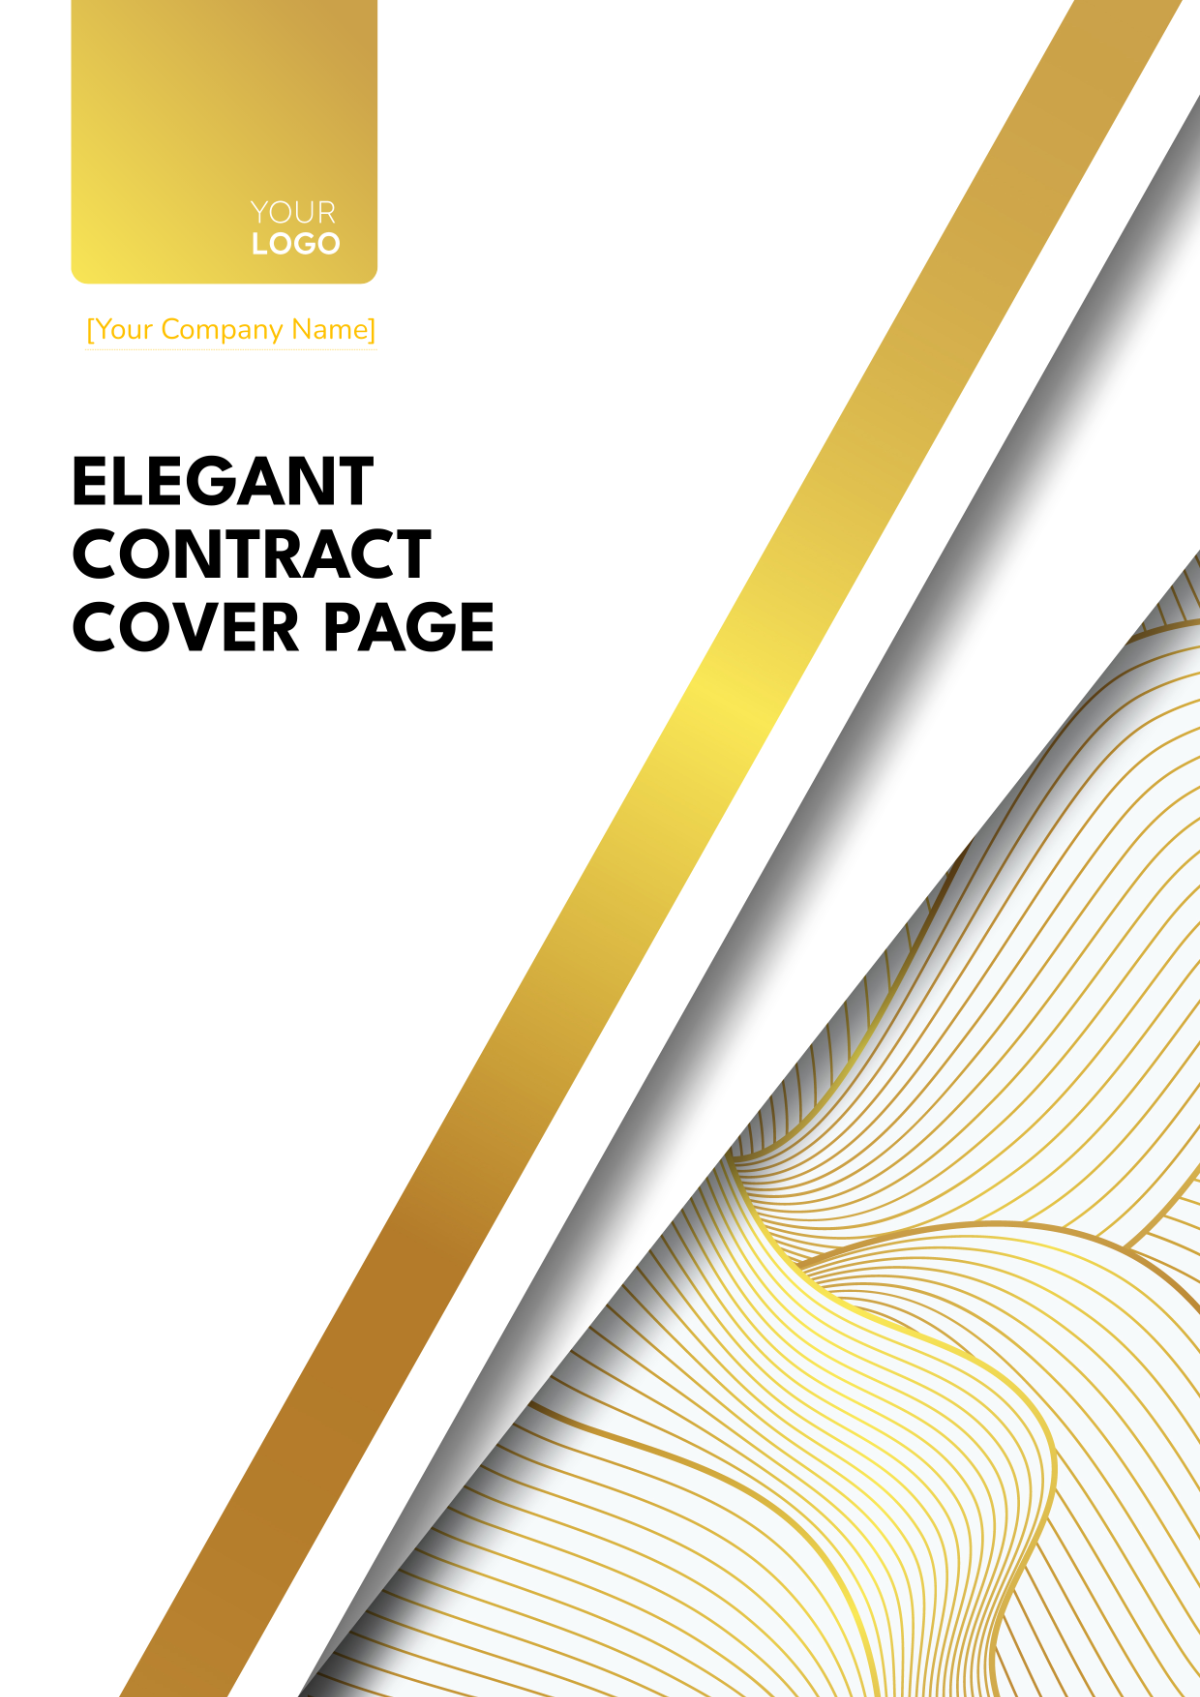 Elegant Contract Cover Page Template